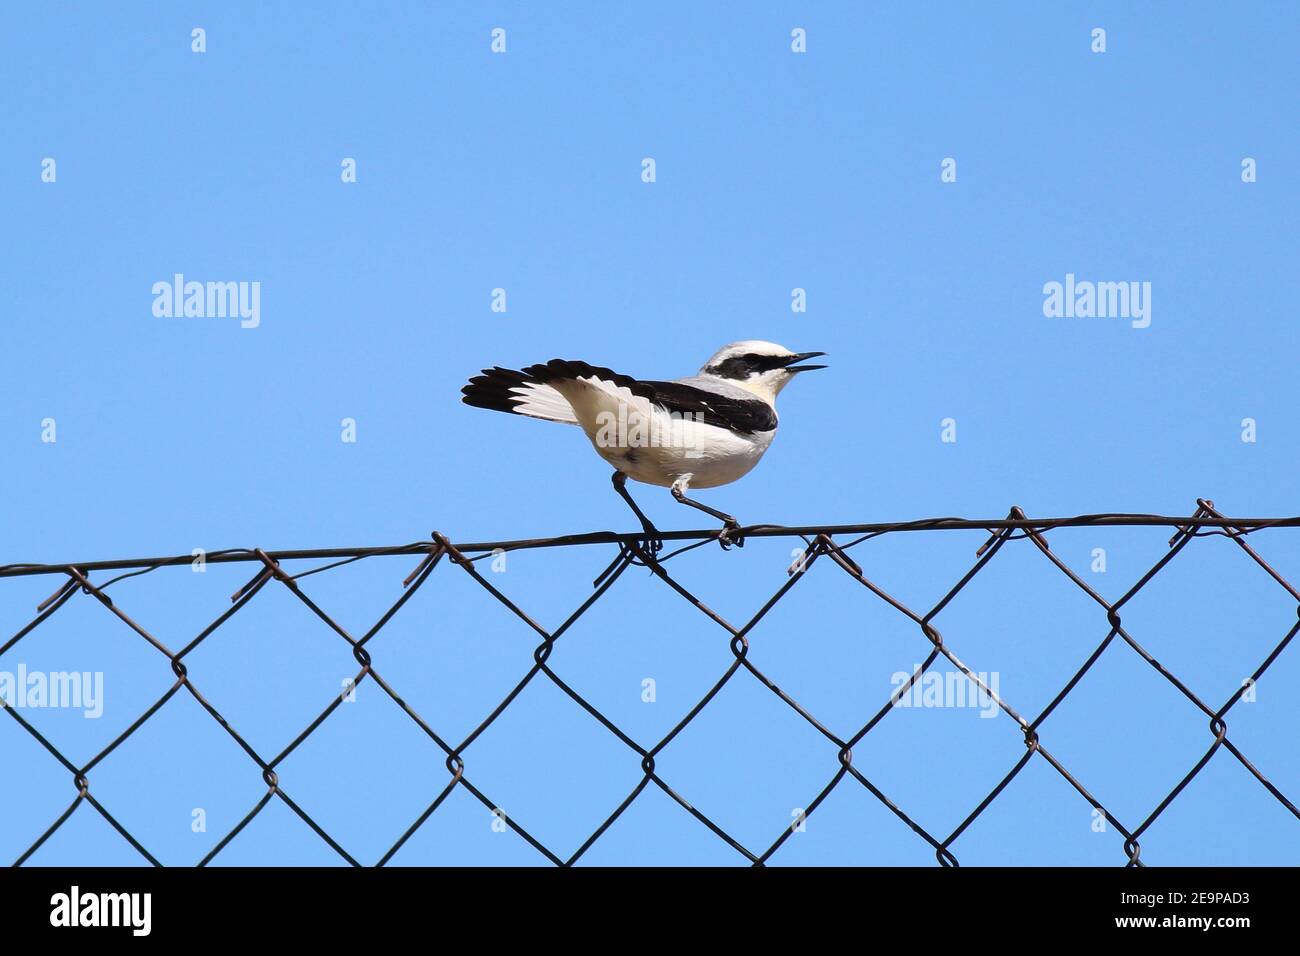 Striking migratory bird with attitude (Northern Wheatear, Oenanthe), perched & against a clear blue sky in the Sierra de Gredos area of central Spain. Stock Photo